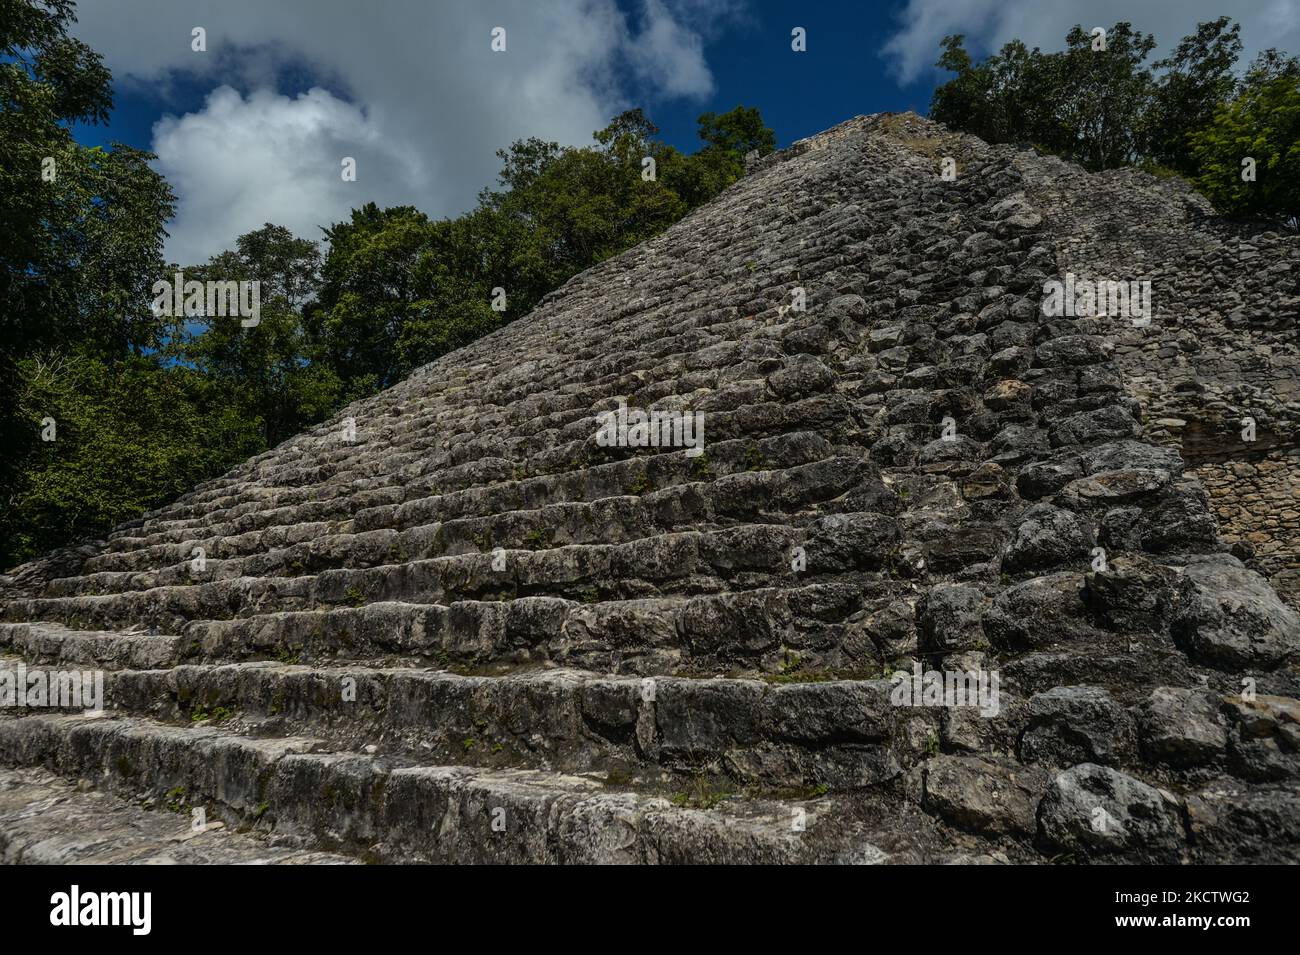 A 137-feet tall (42 meters) Nohoch Mul Pyramid, the tallest Mayan pyramid  on the Yucatan Peninsula and the second tallest Mayan pyramid in the world,  inside the archaeological site of Coba. On